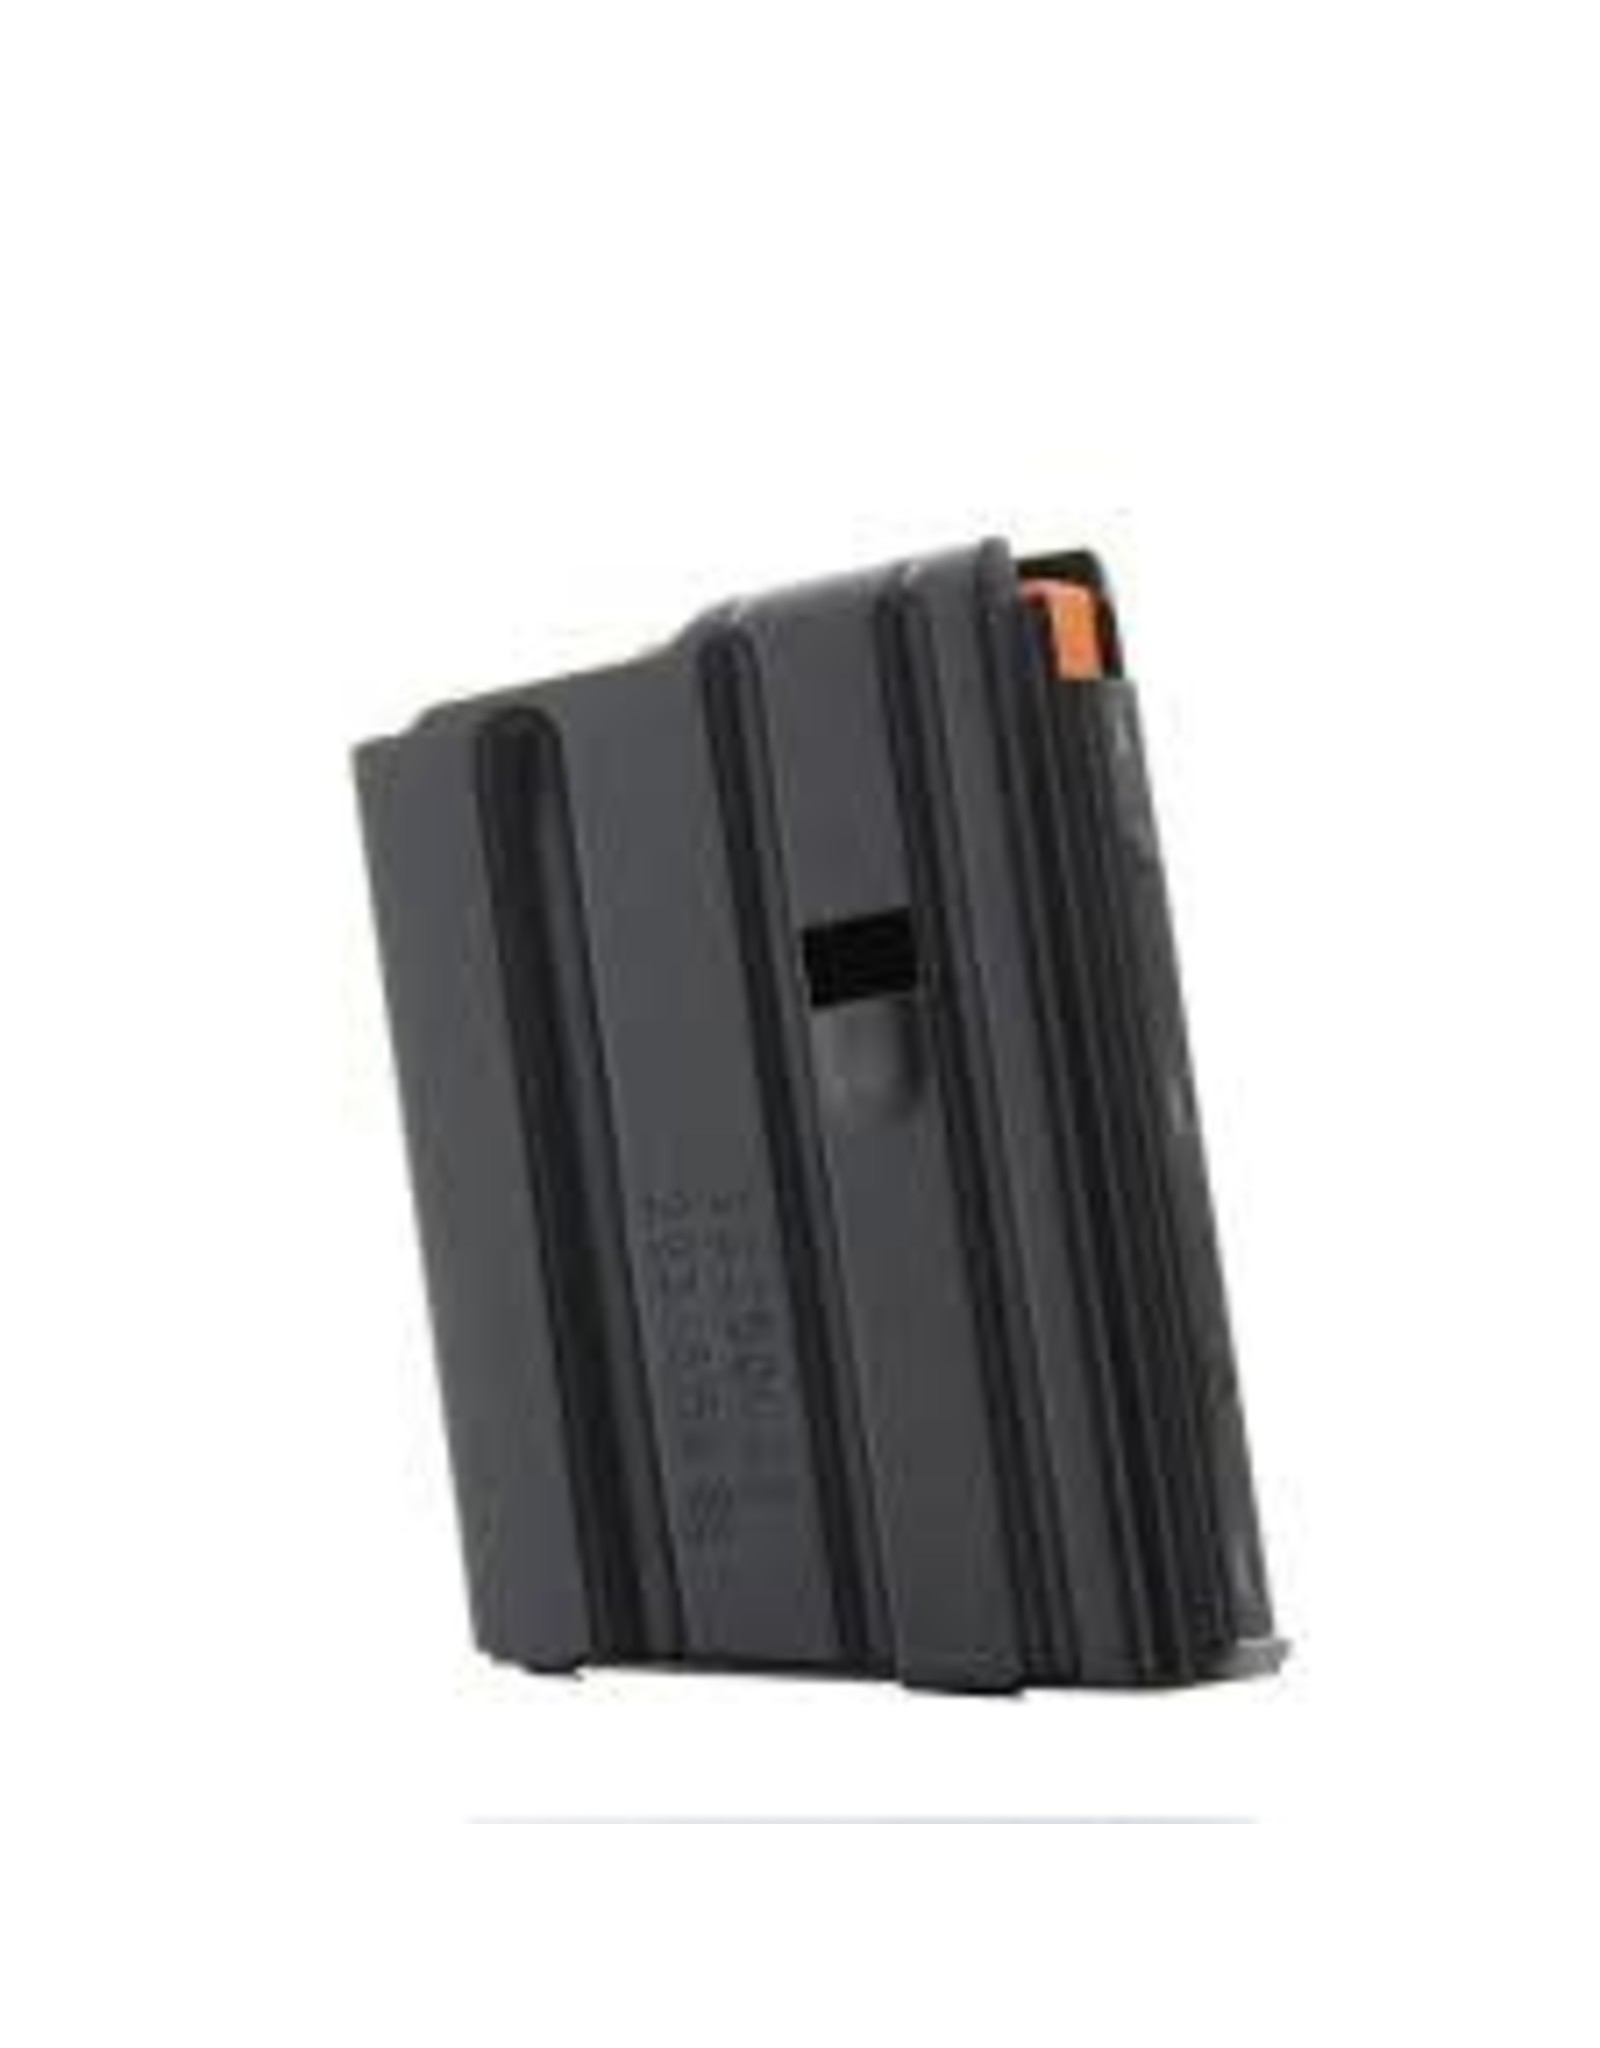 CPRODUCTS DEFENSE CPD DURAMAG SS LAR MAGAZINE